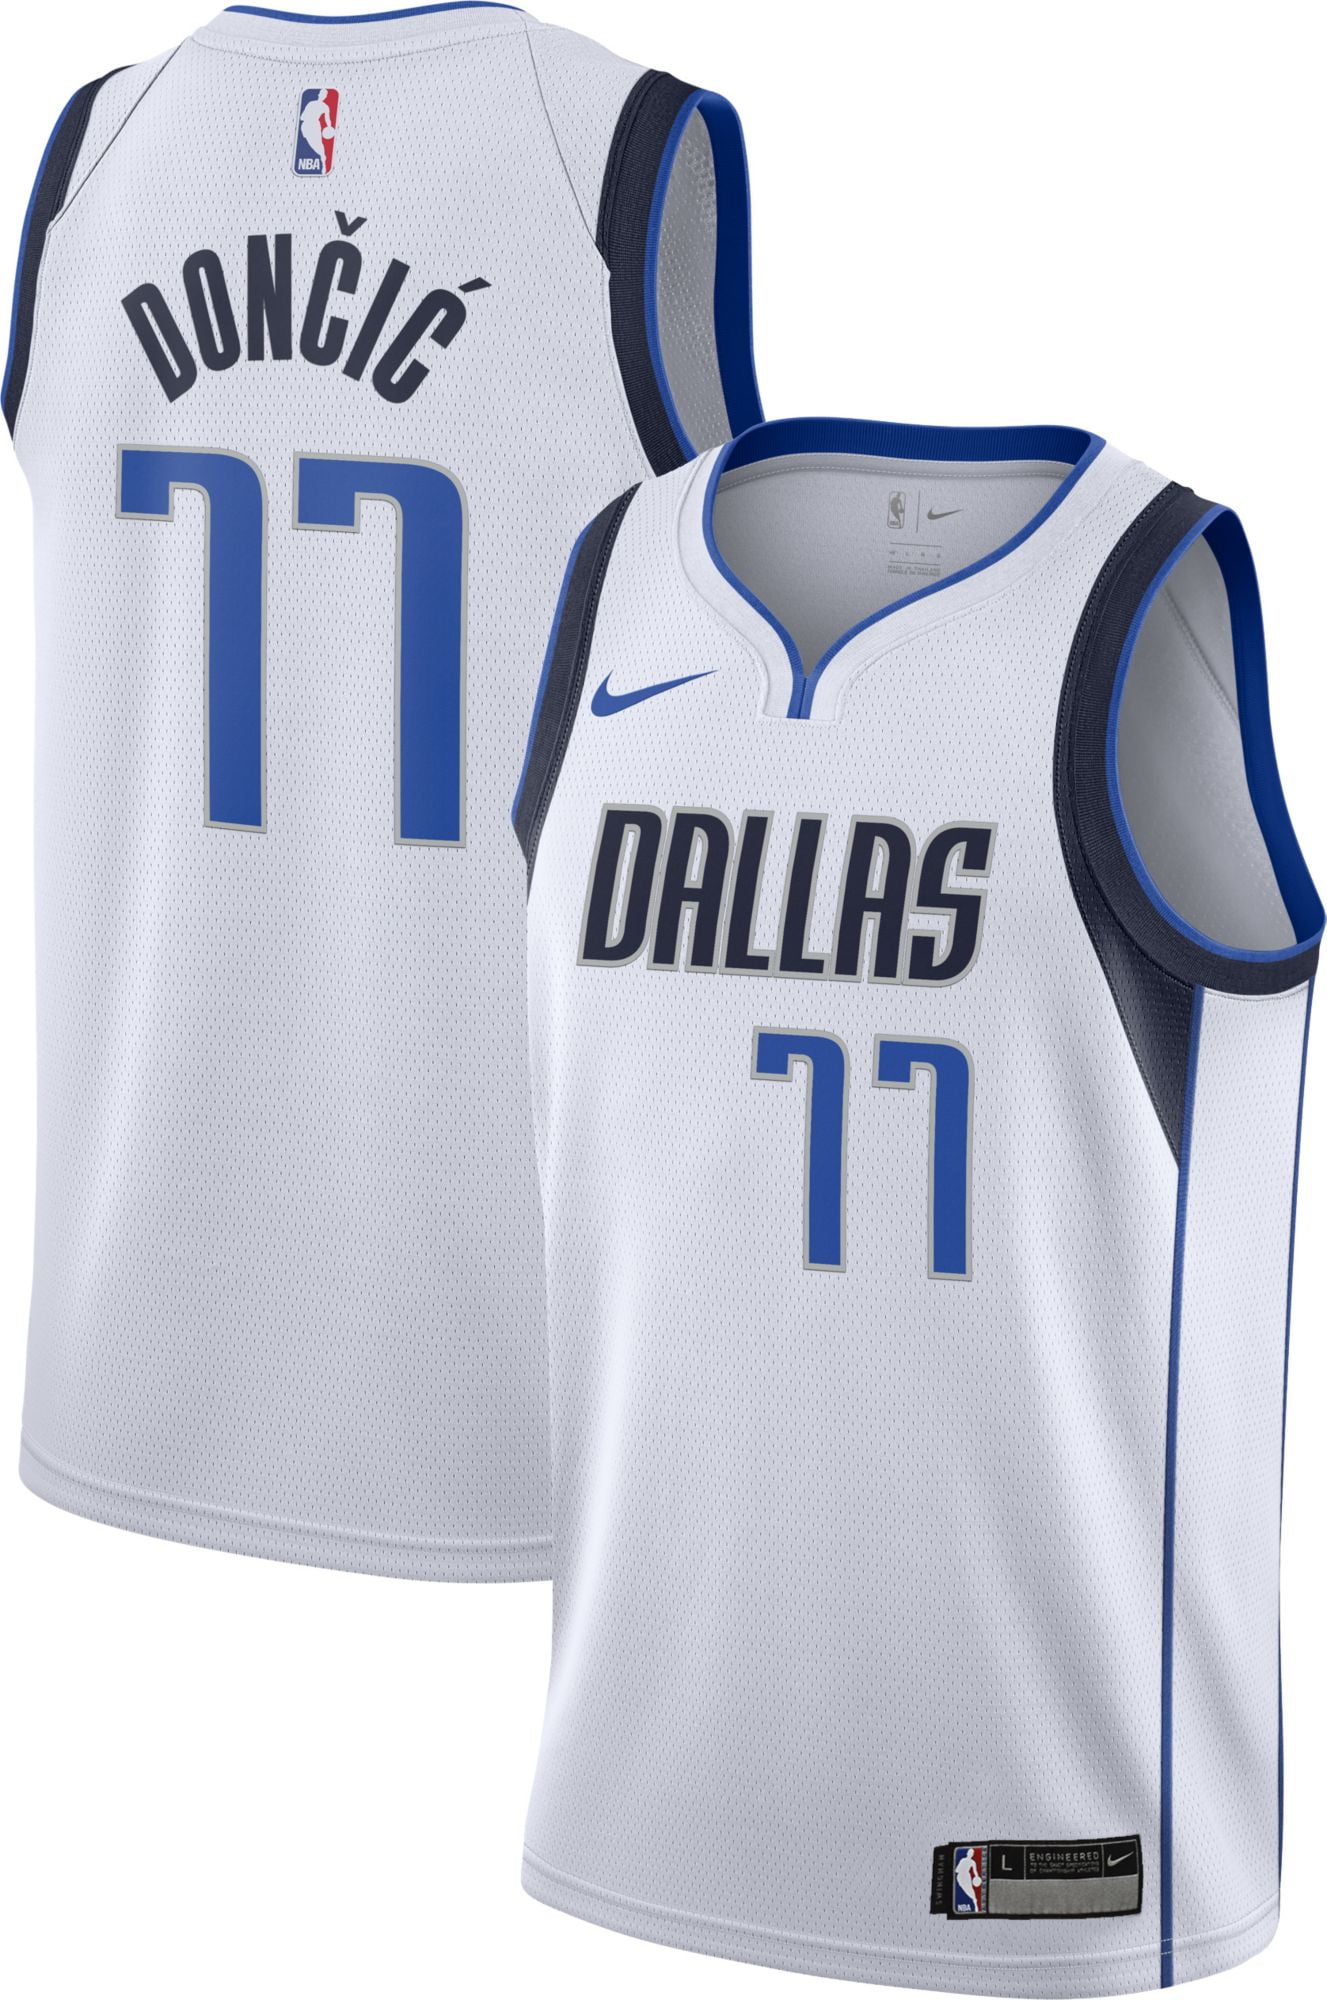 doncic youth jersey